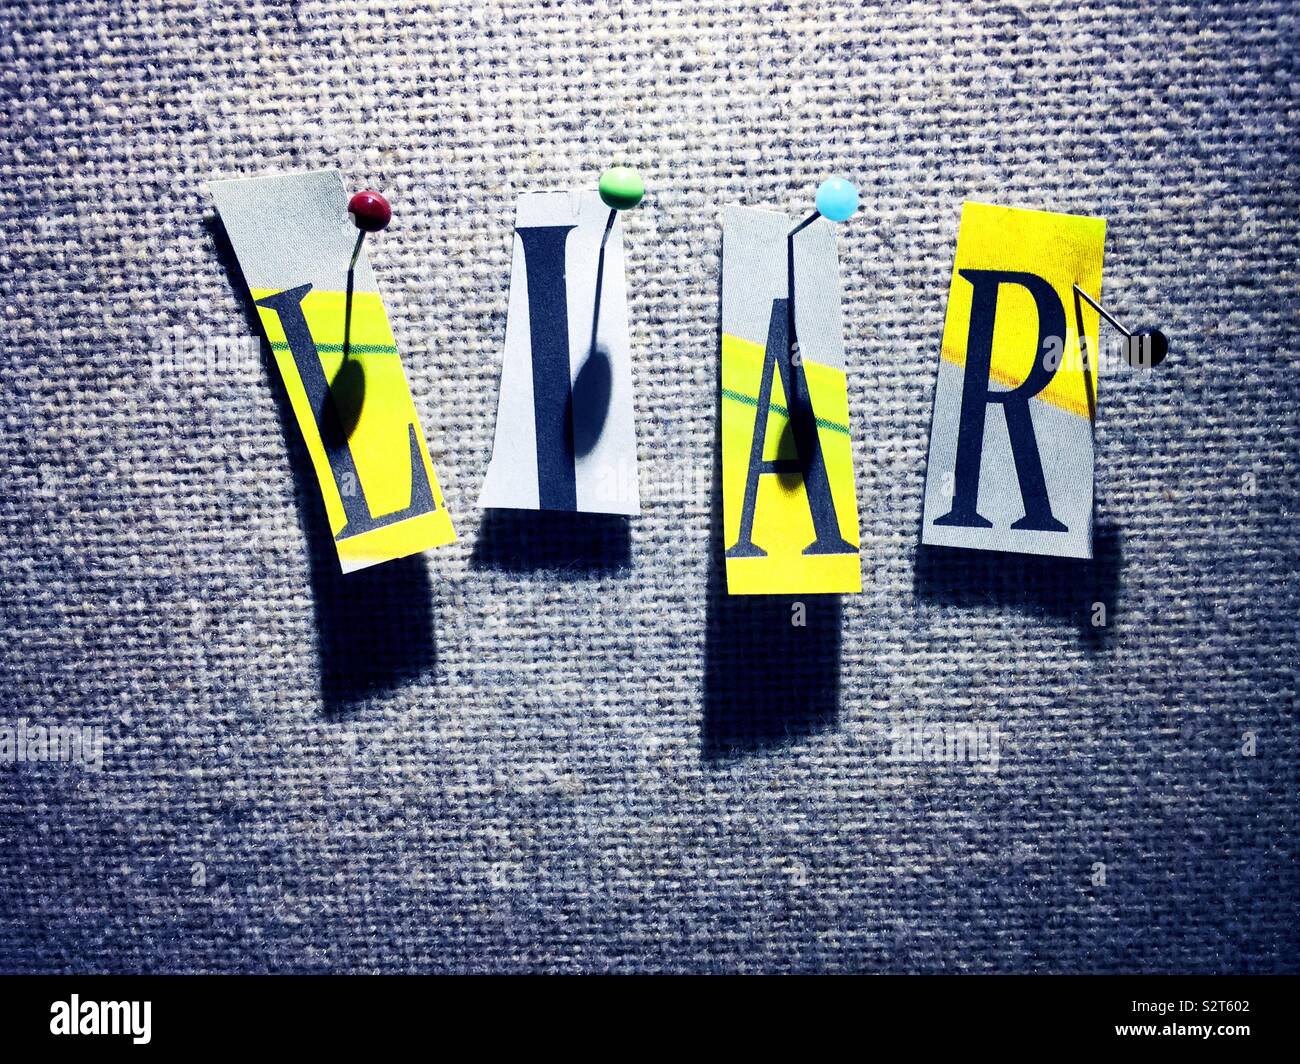 The word liar spelled out on a bulletin board in ransom note style, USA Stock Photo